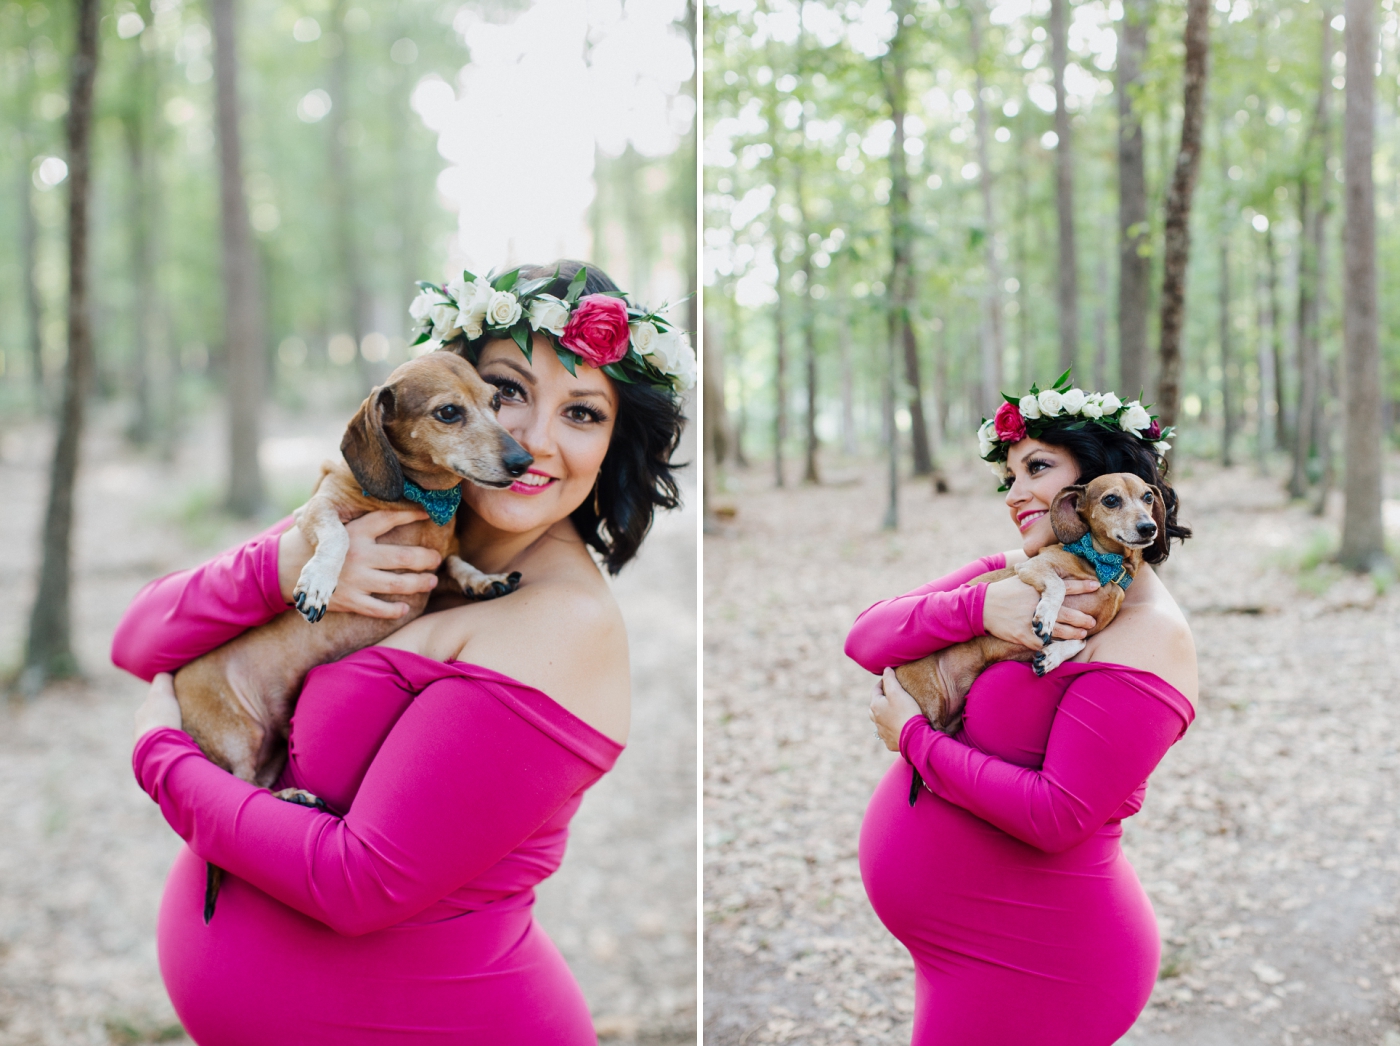 Maternity session with a hot pink dress and flower crown 